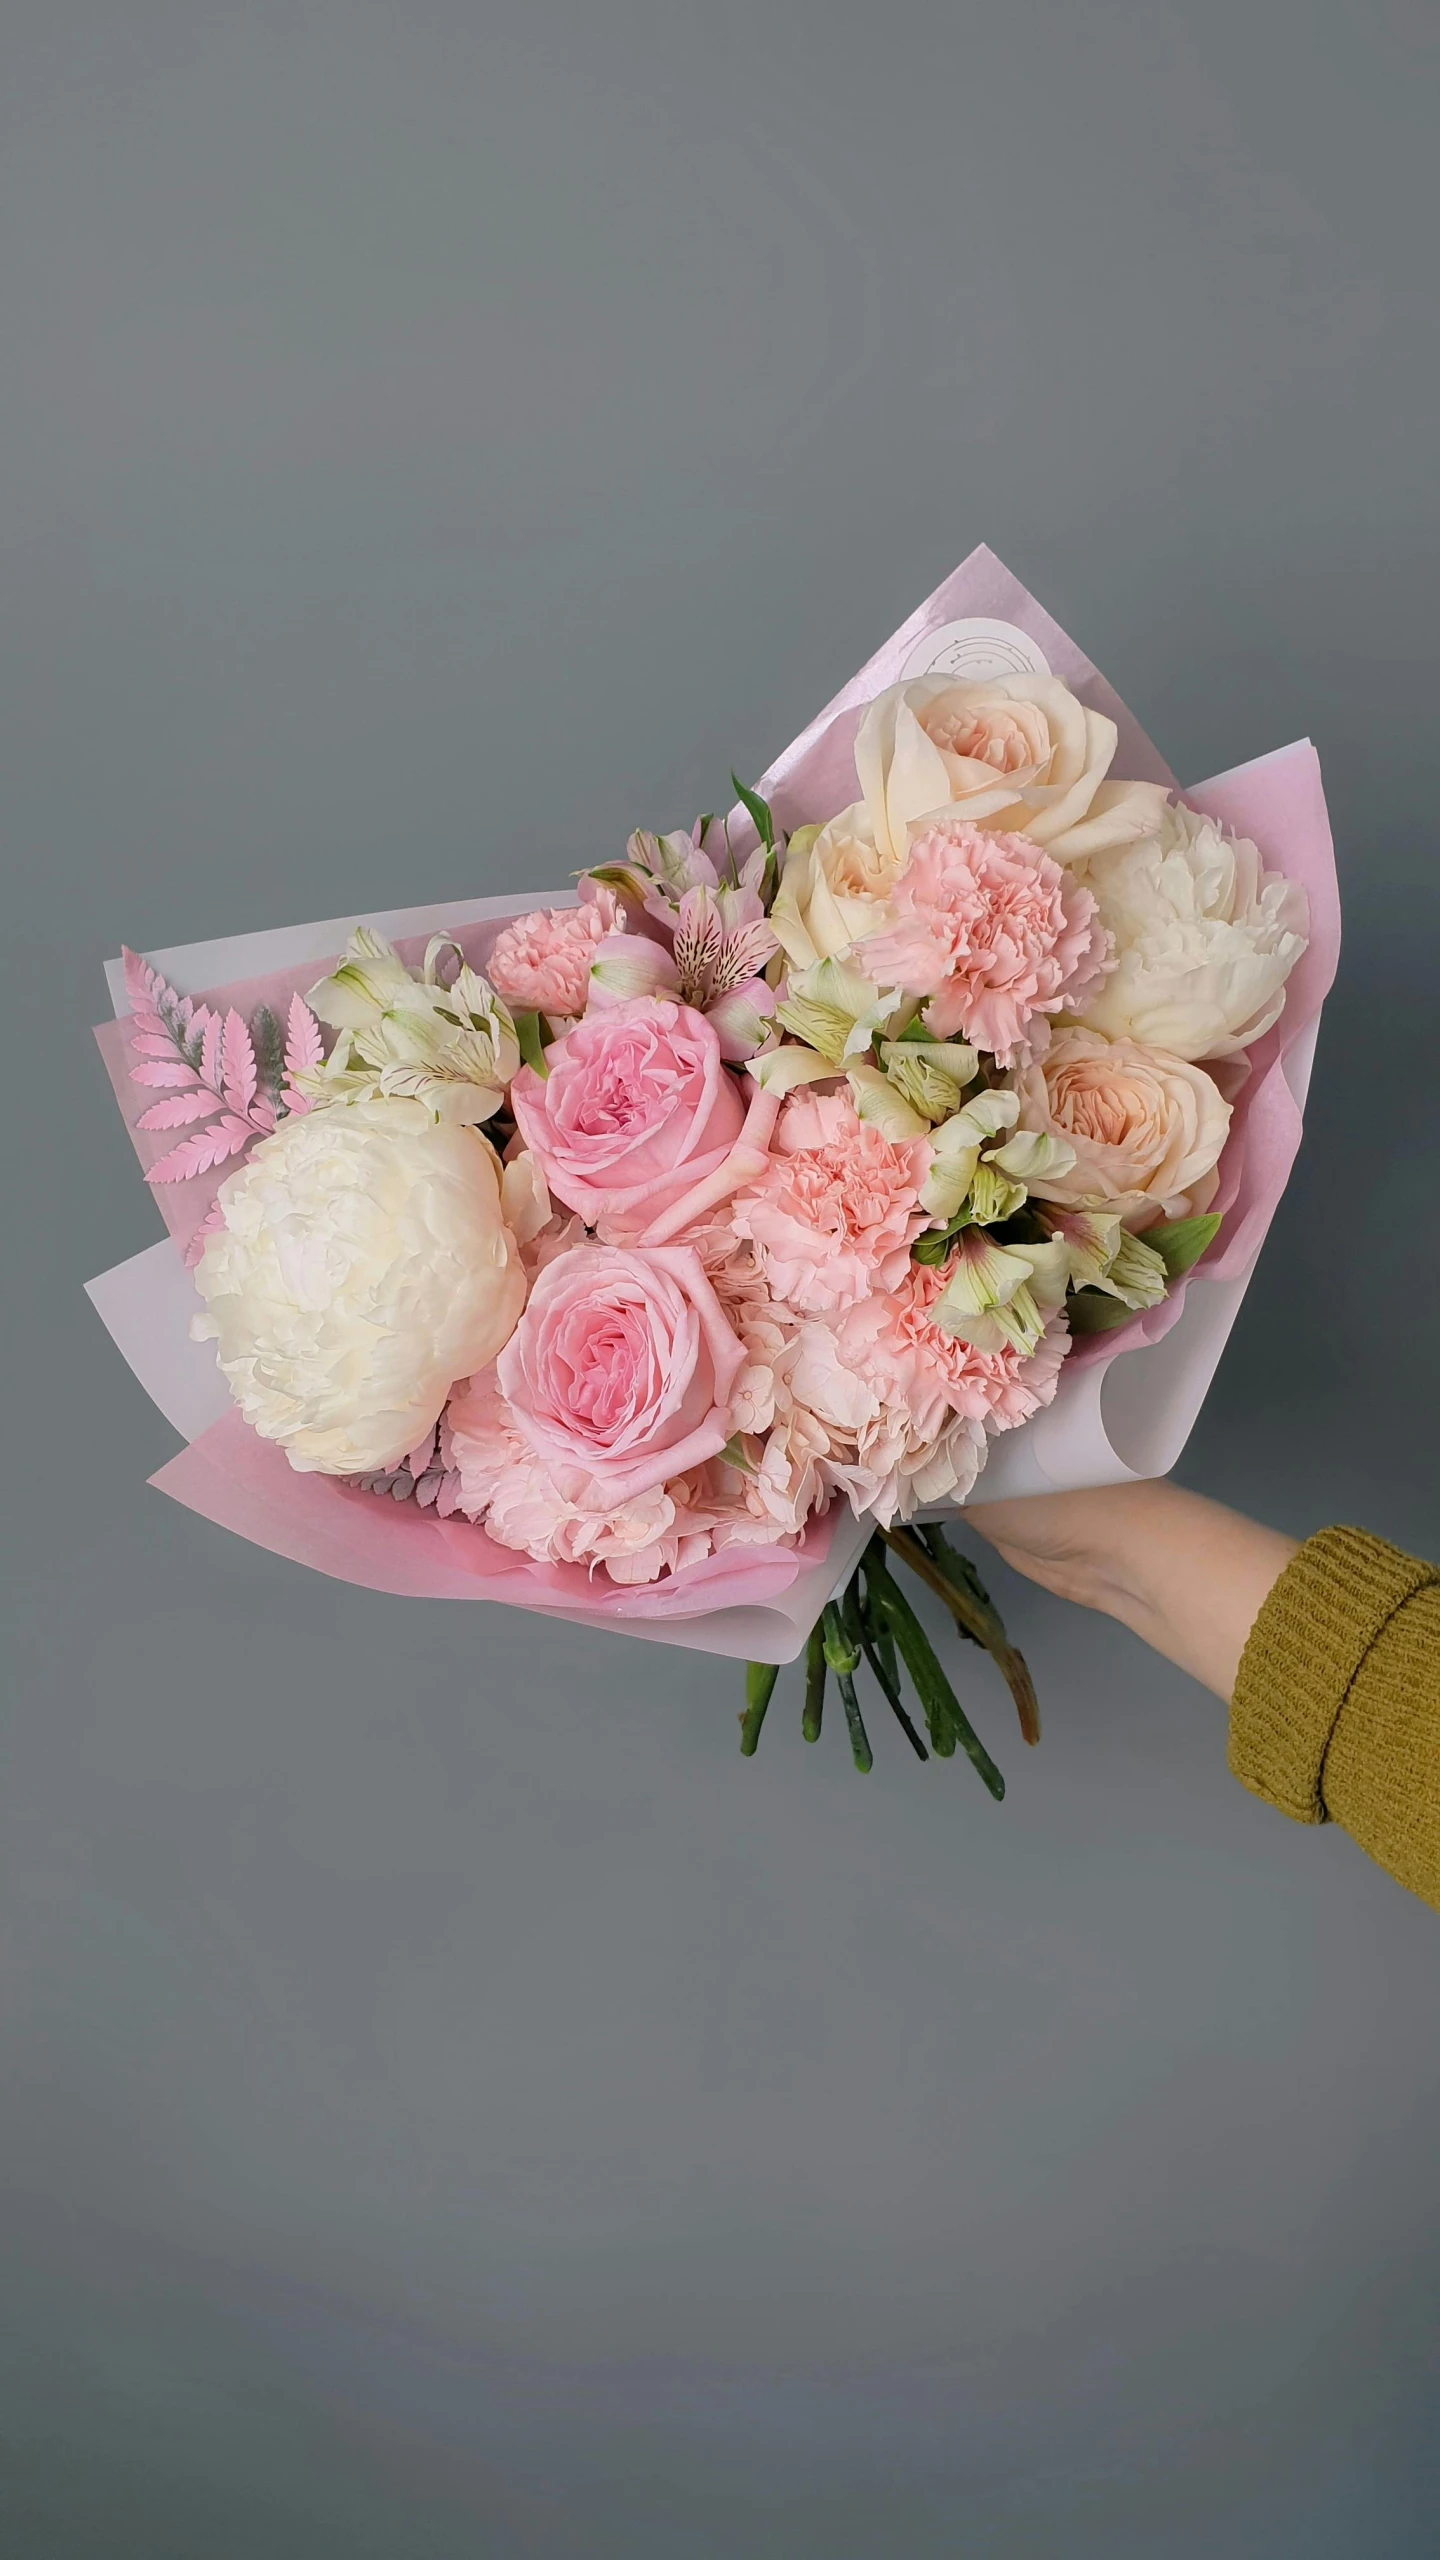 a woman holding a bouquet of pink and white flowers, a pastel, inspired by François Boquet, pexels, on grey background, sweet hugs, flower shop scene, carnation